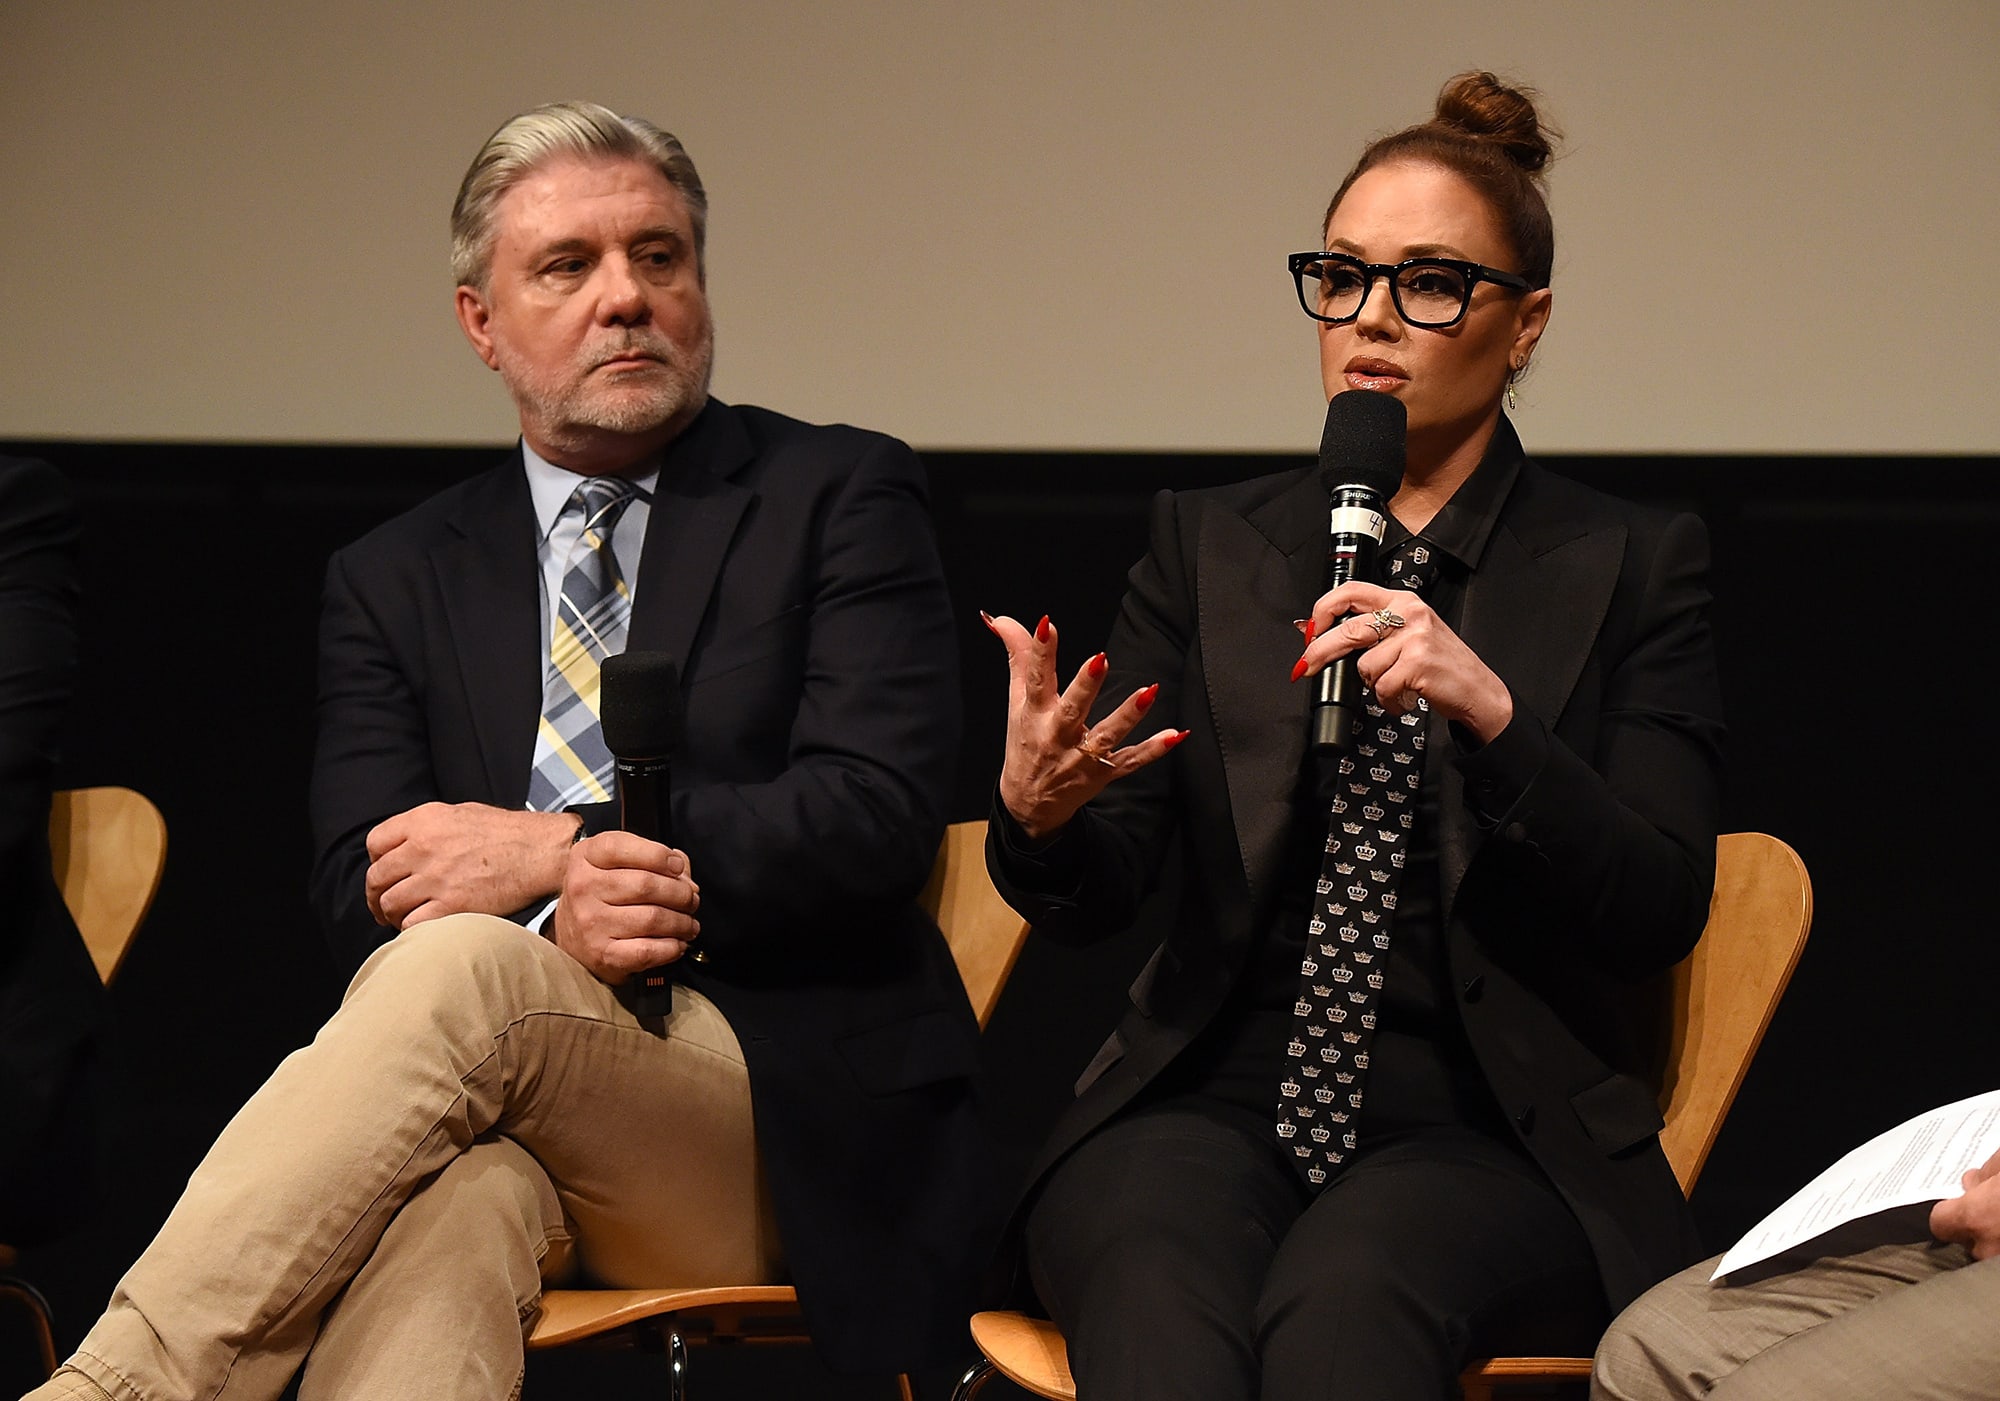 Mike Rinder, left, and Leah Remini attend 'Leah Remini: Scientology and the Aftermath' FYC Screening on May 17, 2018 in Hollywood, California